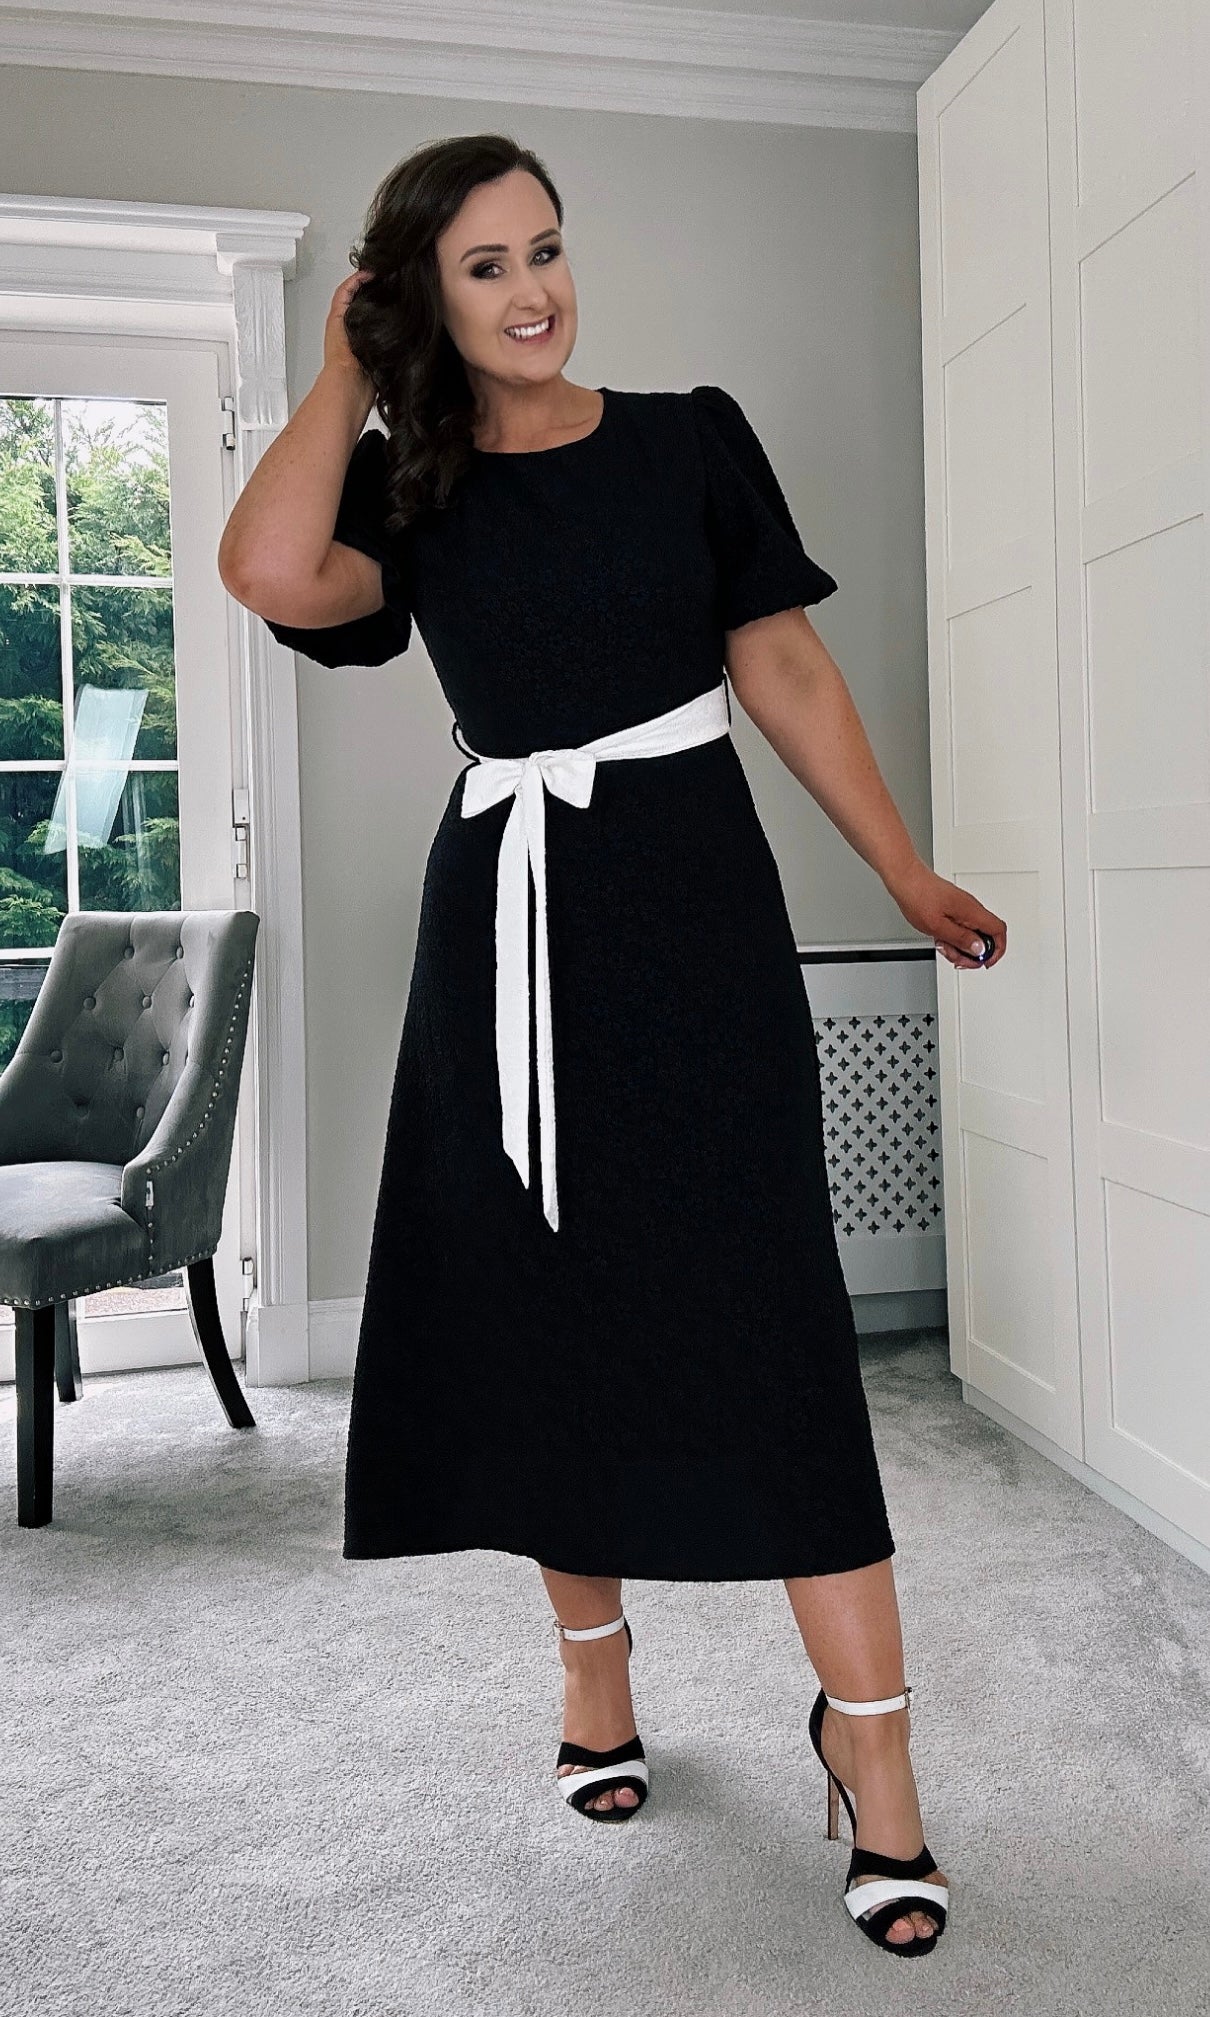 SPECIAL OCCASION BLACK MIDI ALINE DRESS WITH 2 COORDINATING BELTS